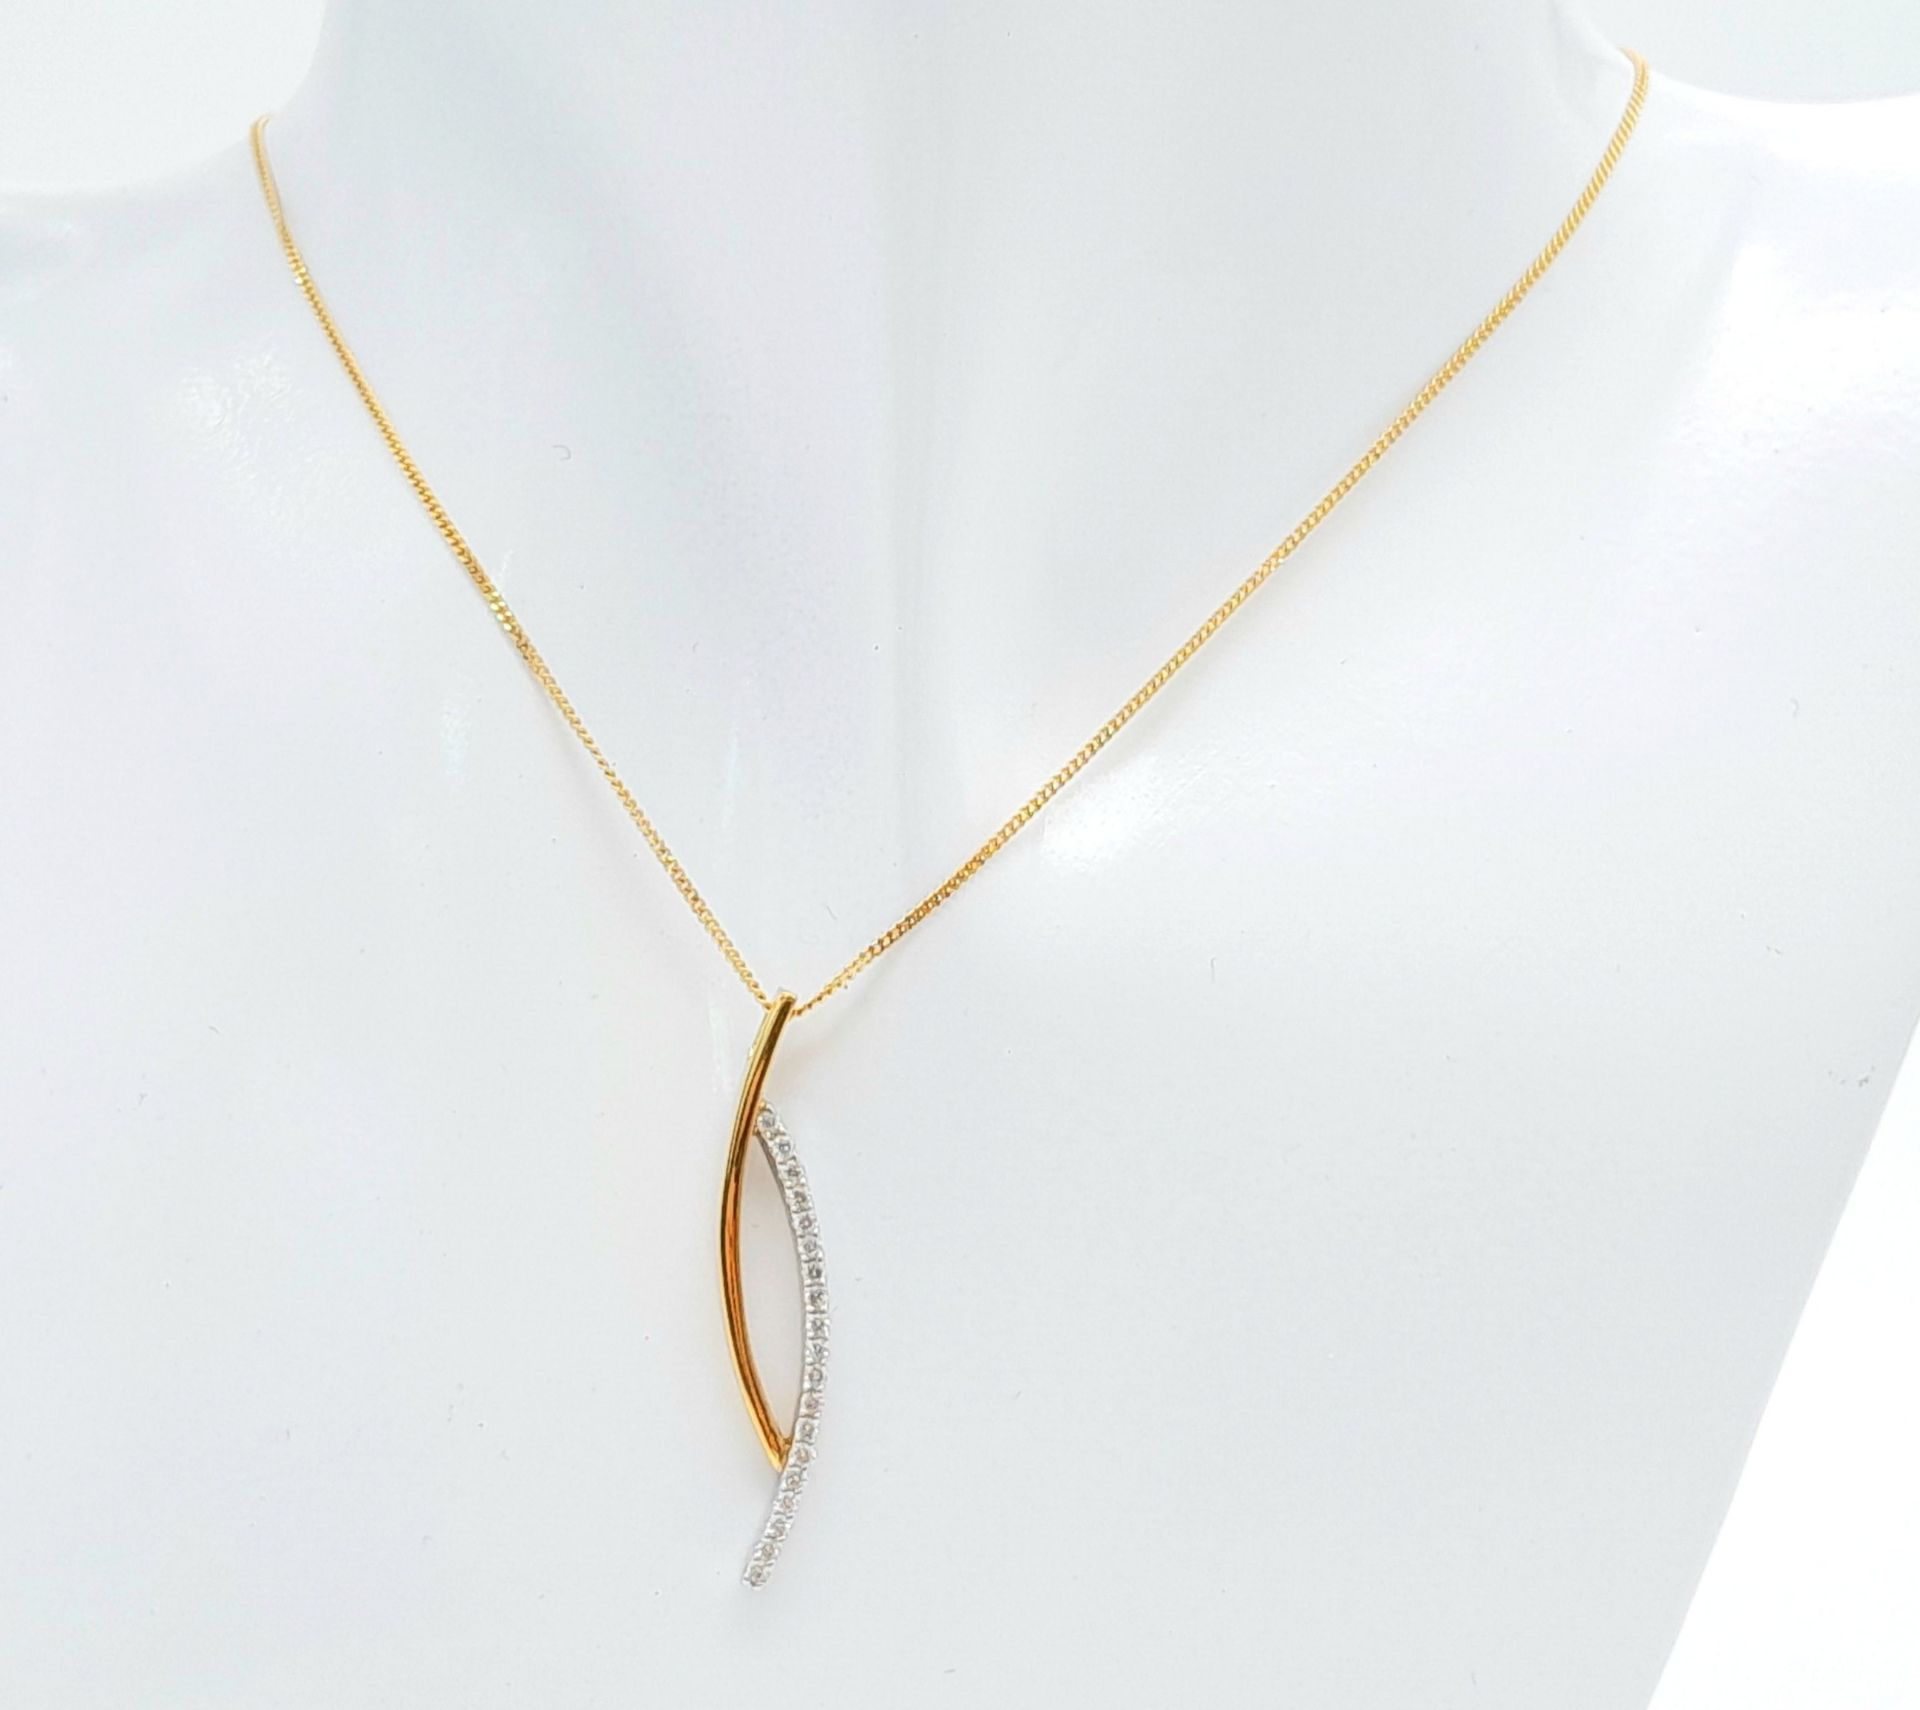 A 9 K yellow gold chain necklace with a modern pendant loaded with round cut diamonds. Chain length: